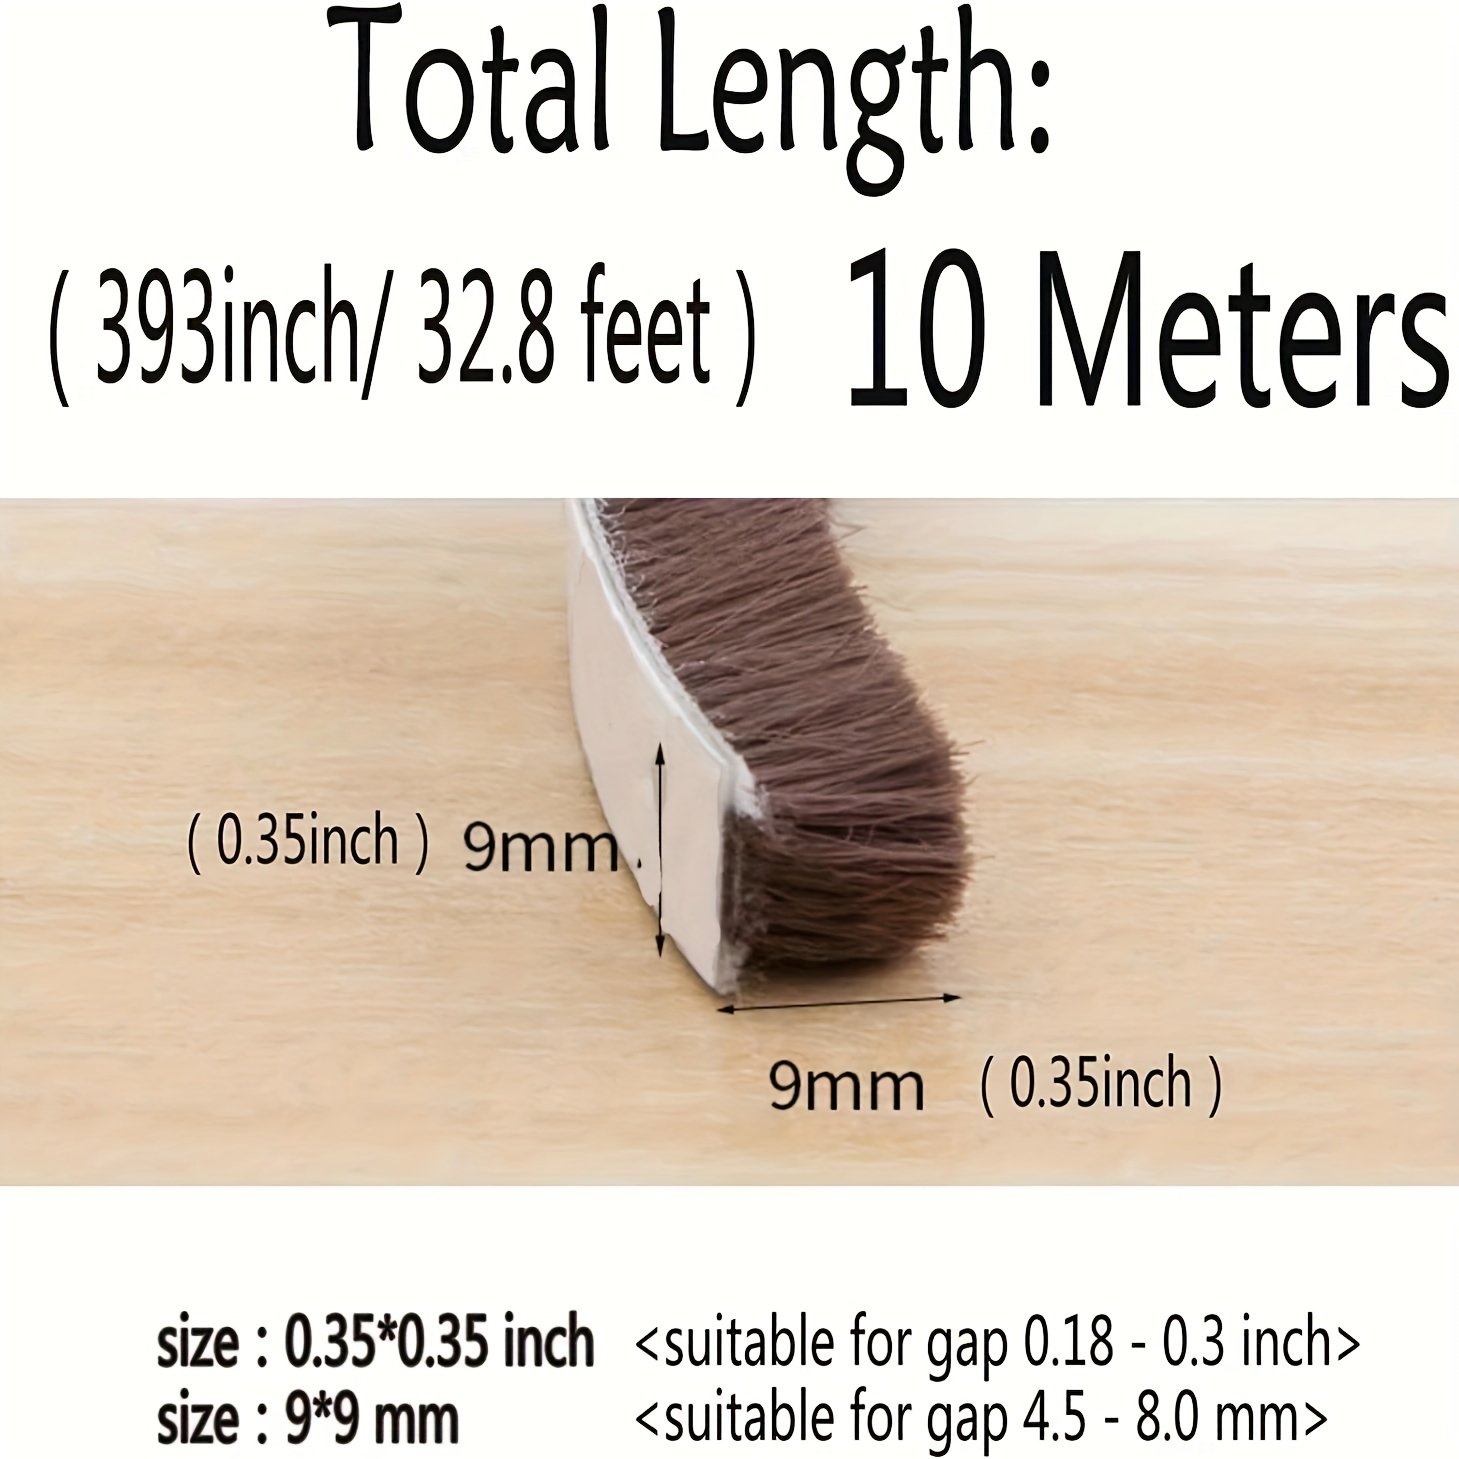 Weather Stripping Door Seal, 32.8Ft Self Adhesive Brush Weather Seal Strip  for Windows and Doors Felt Door Seal Window Insulation Sealing Strip Brush